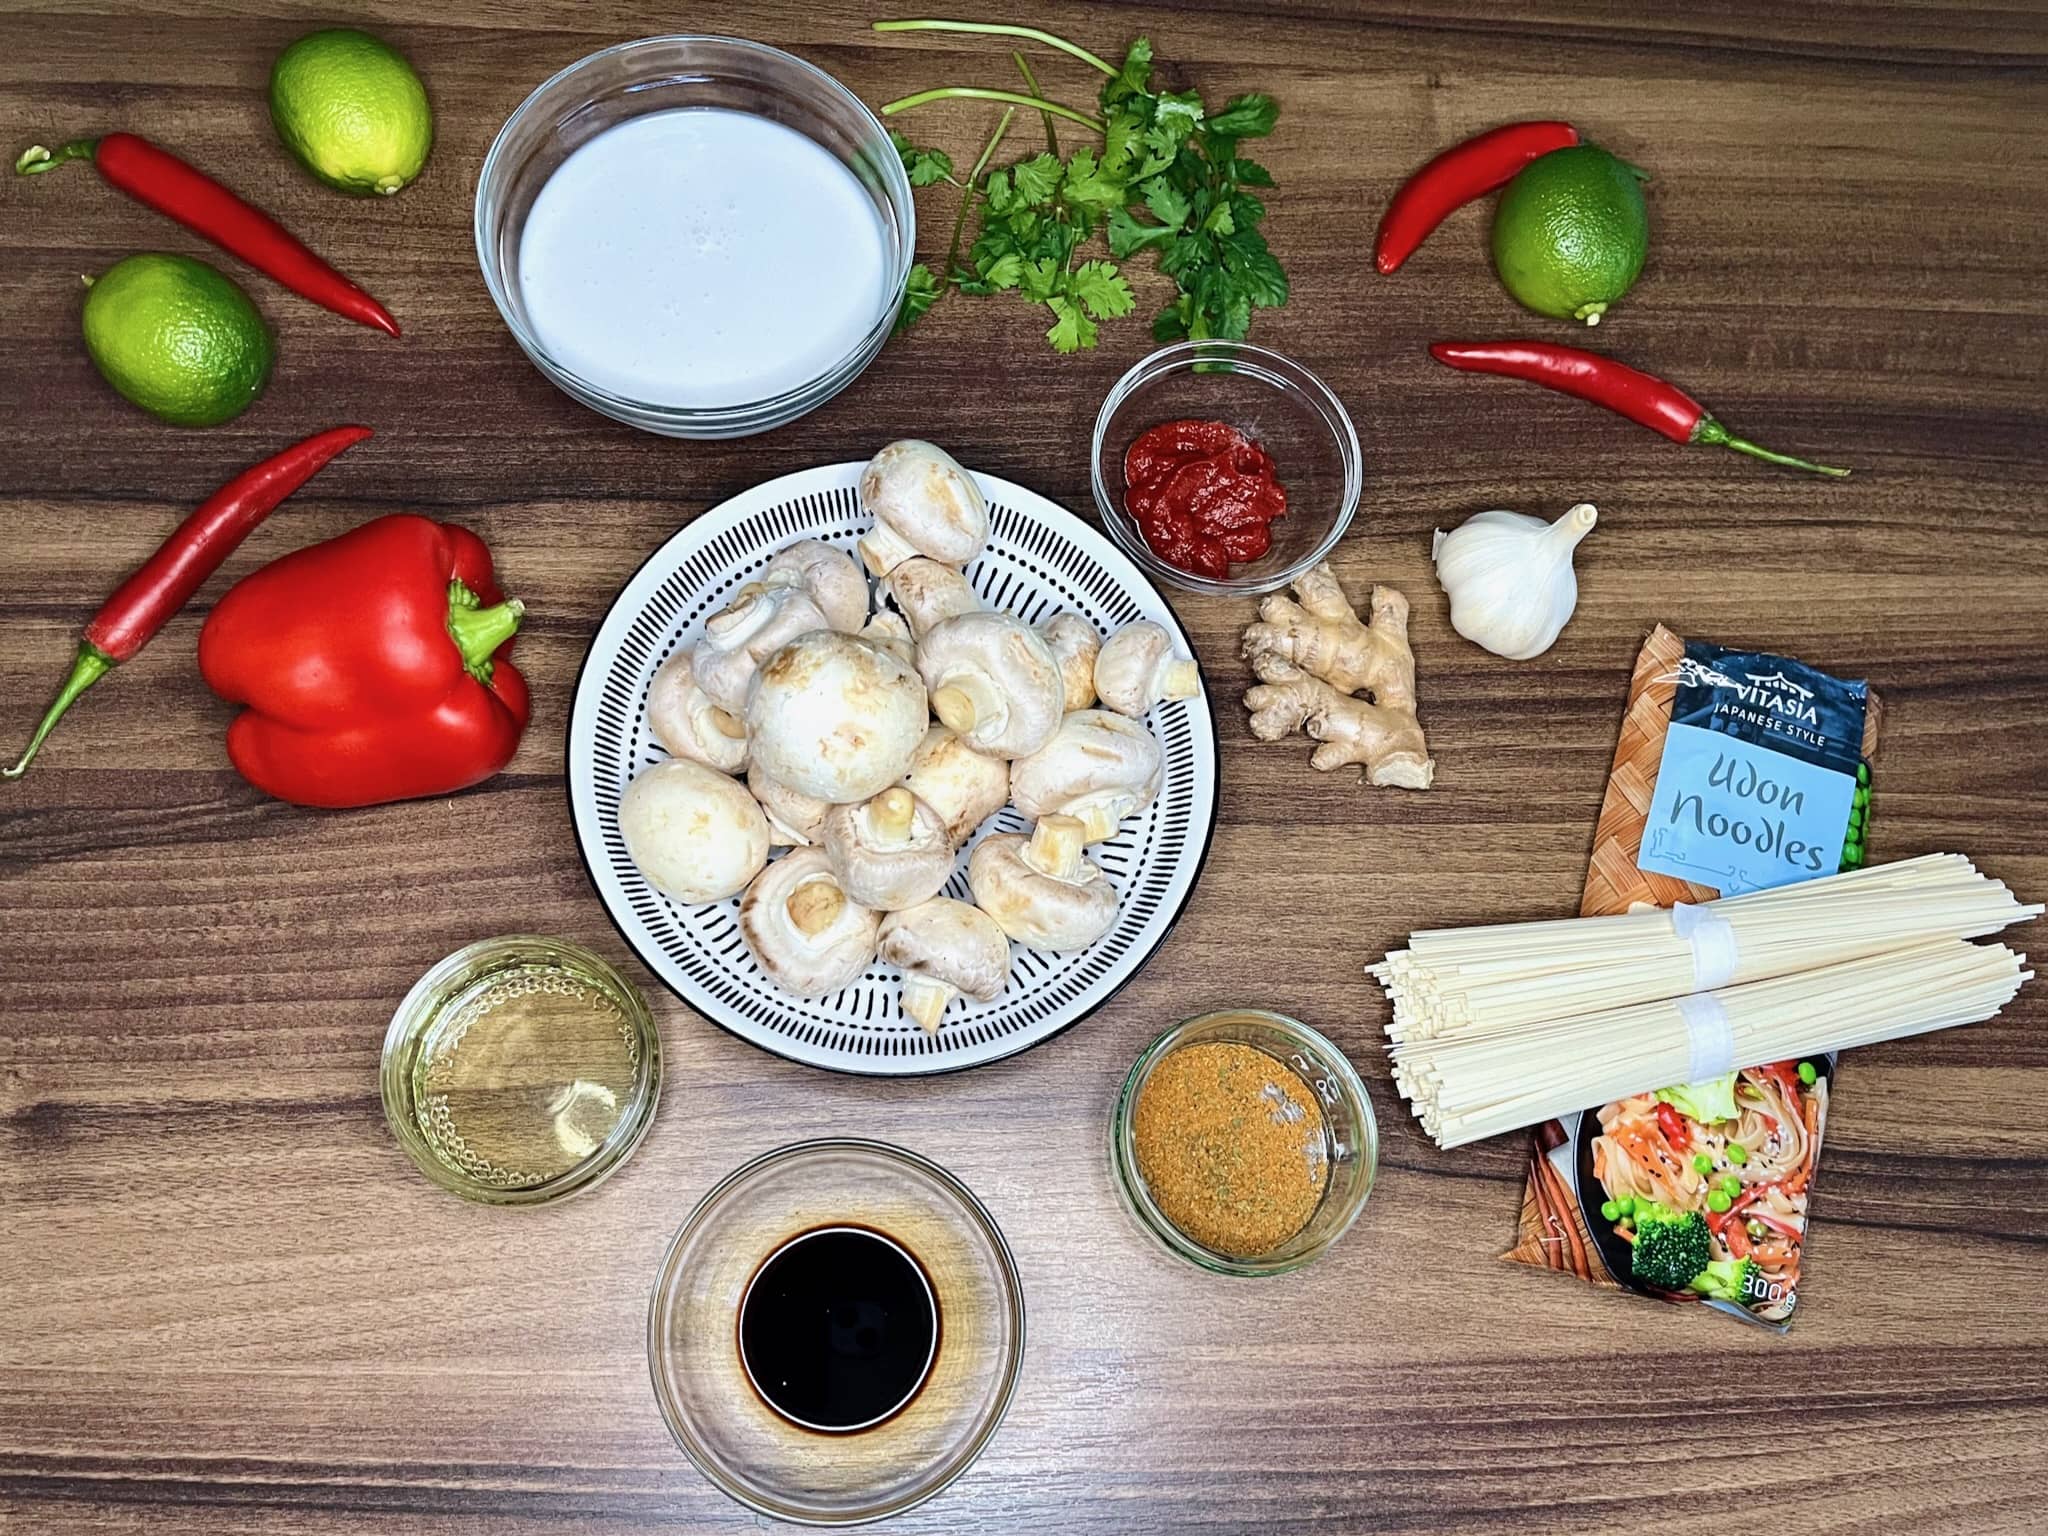 All the ingredients are on the table, ready to make Veggie Thai Curry with Udon Noodles